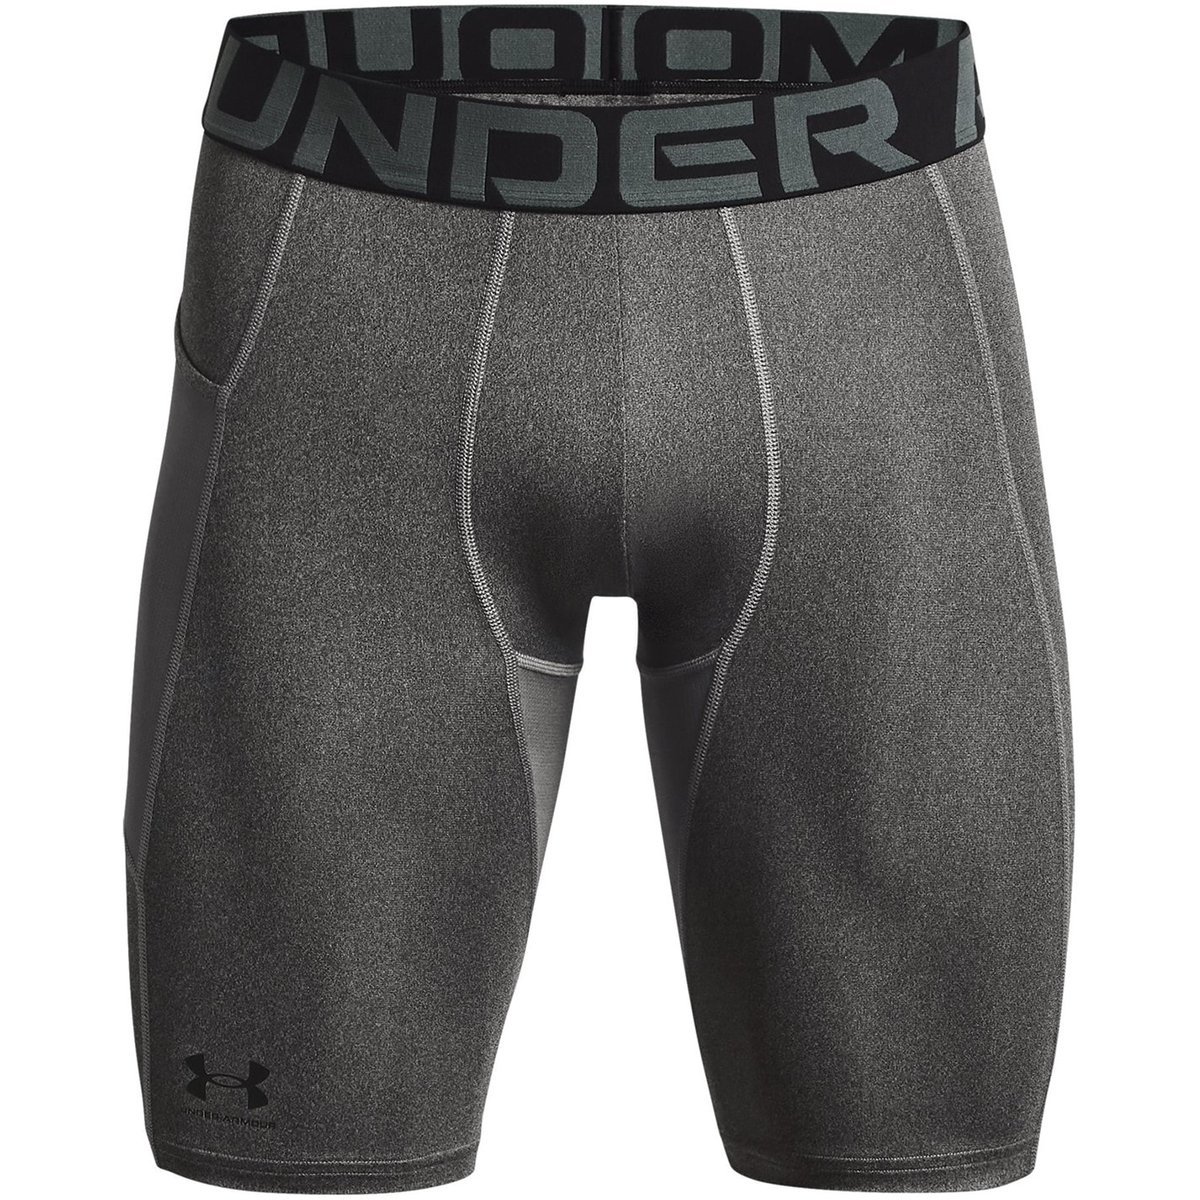  Under Armour Challenger Ii Training Pants, Anthracite  (016)/Black, 3X-Large : Clothing, Shoes & Jewelry